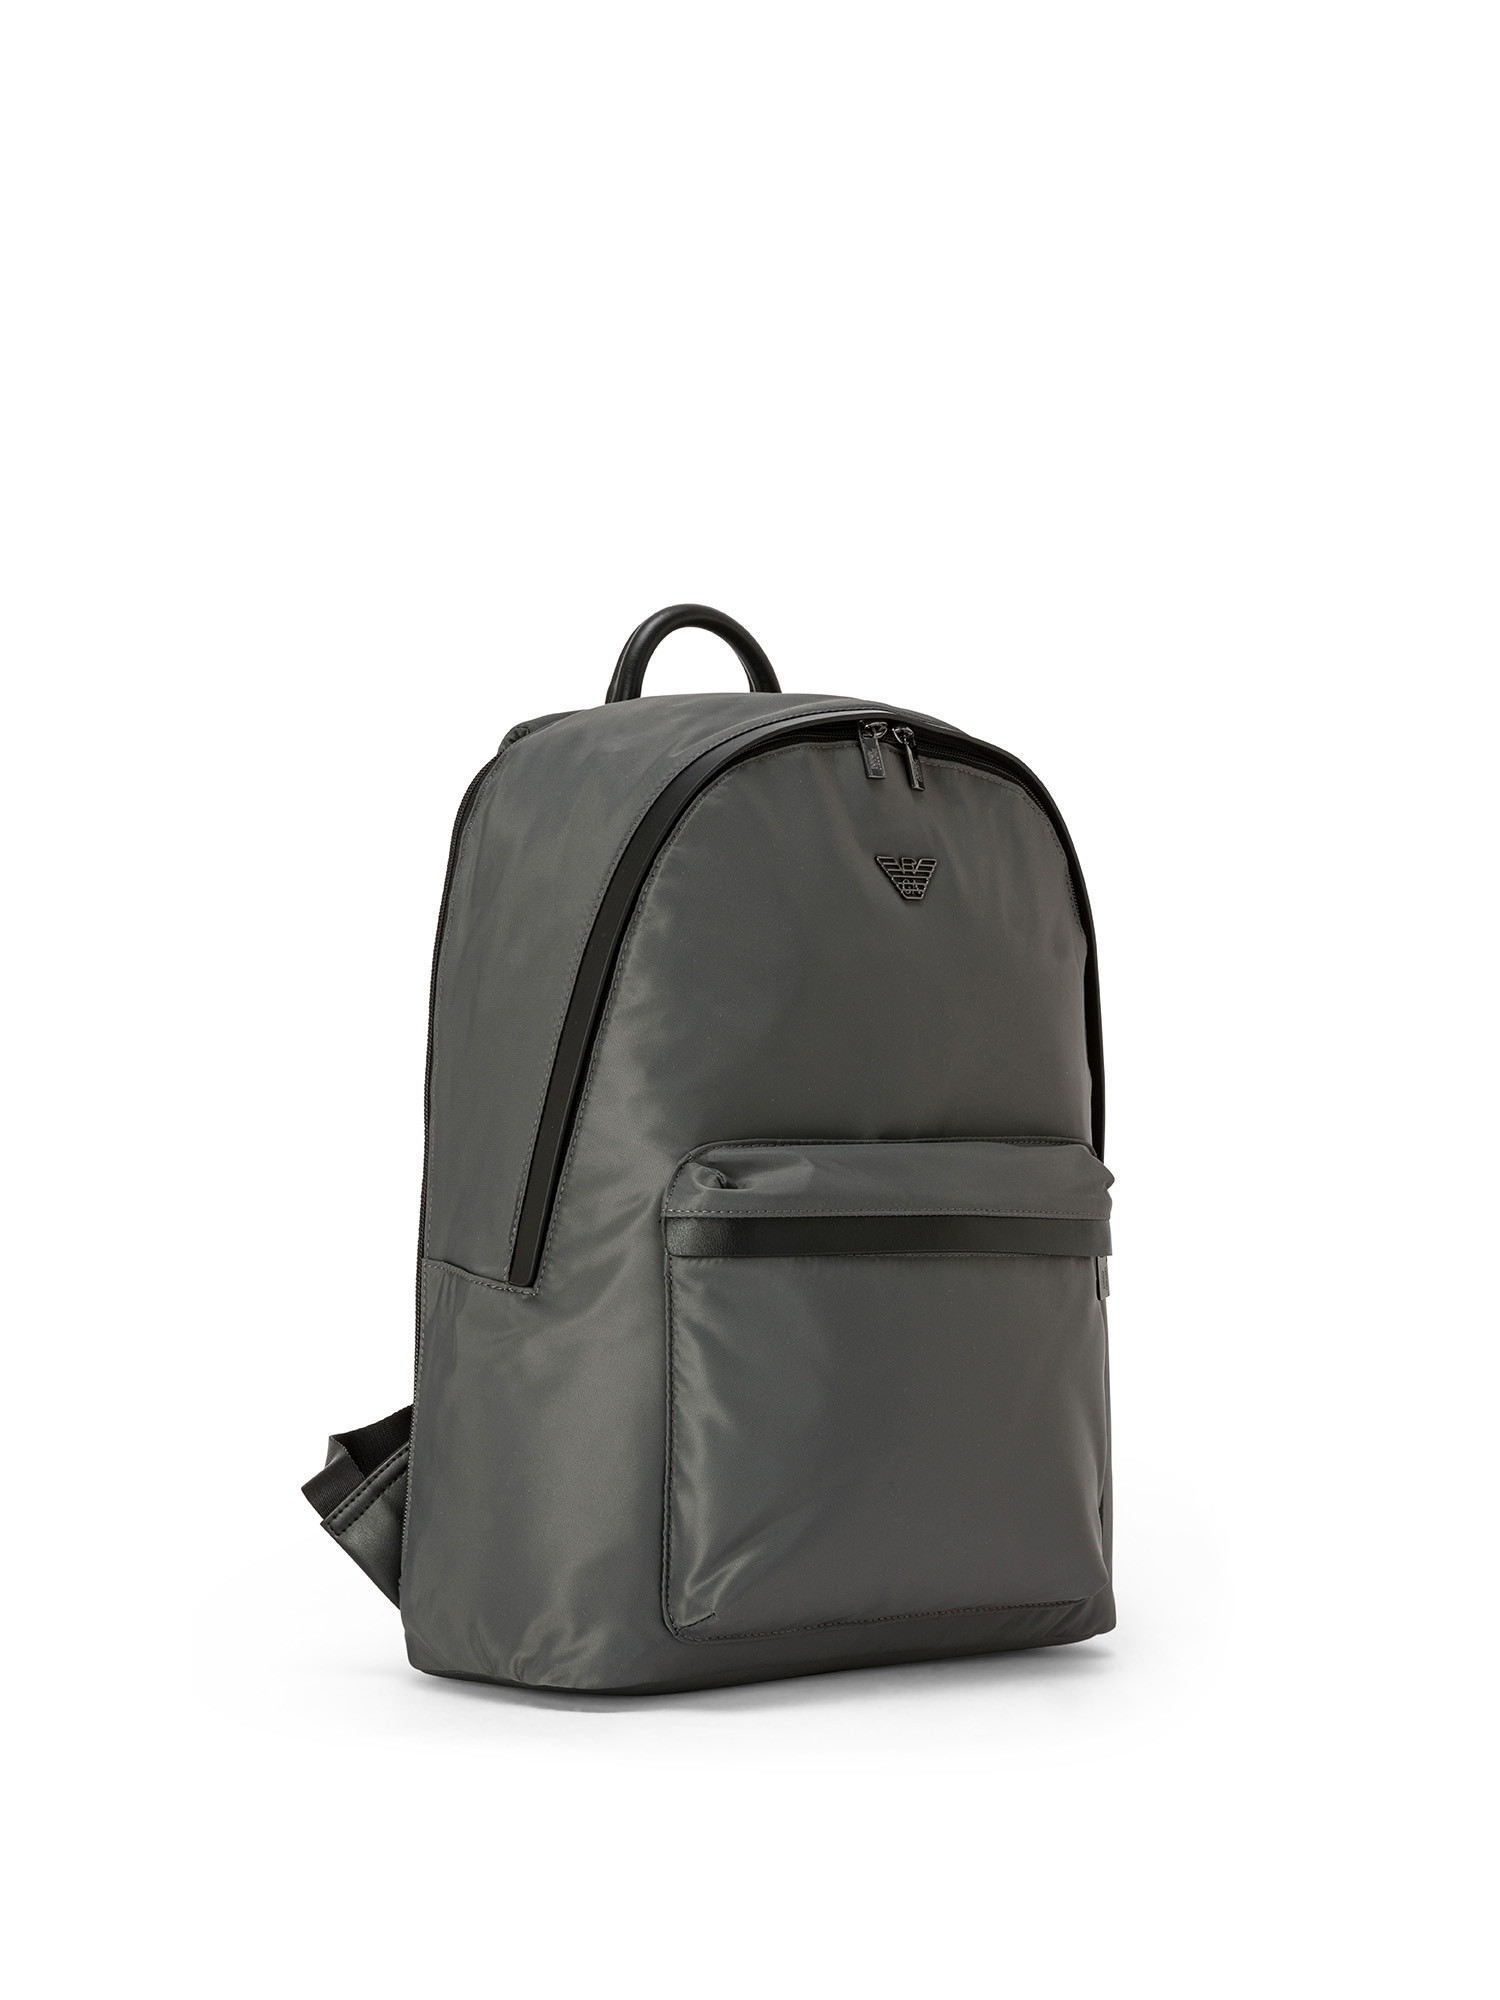 Emporio Armani - Backpack in recycled nylon with logo, Dark Grey, large image number 1